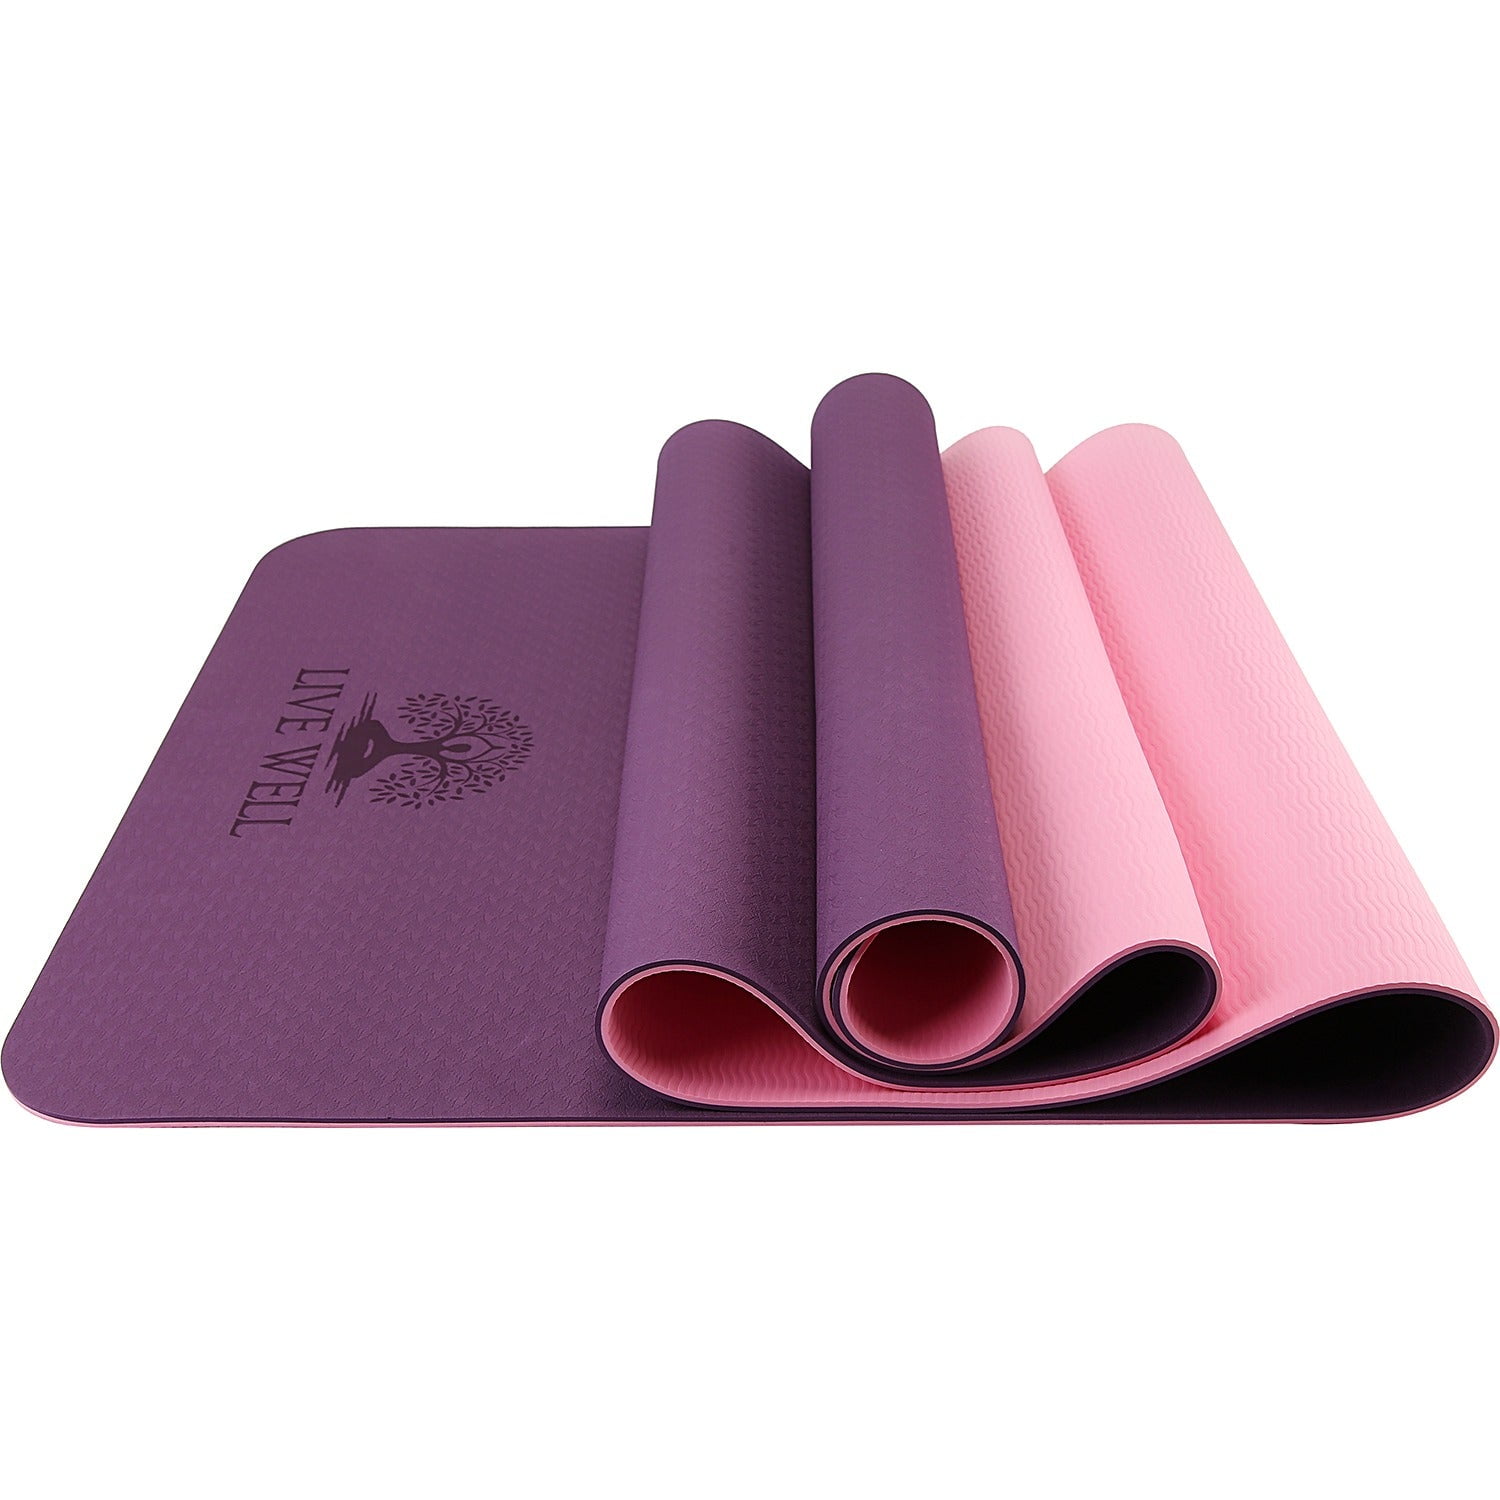 Yoga Mat Bags and Carriers Fits All Your Stuff,Yoga Mat with Bag With Large  Side Pocket & Zipper Pocket,Yoga Gifts for Women and Yoga Lover